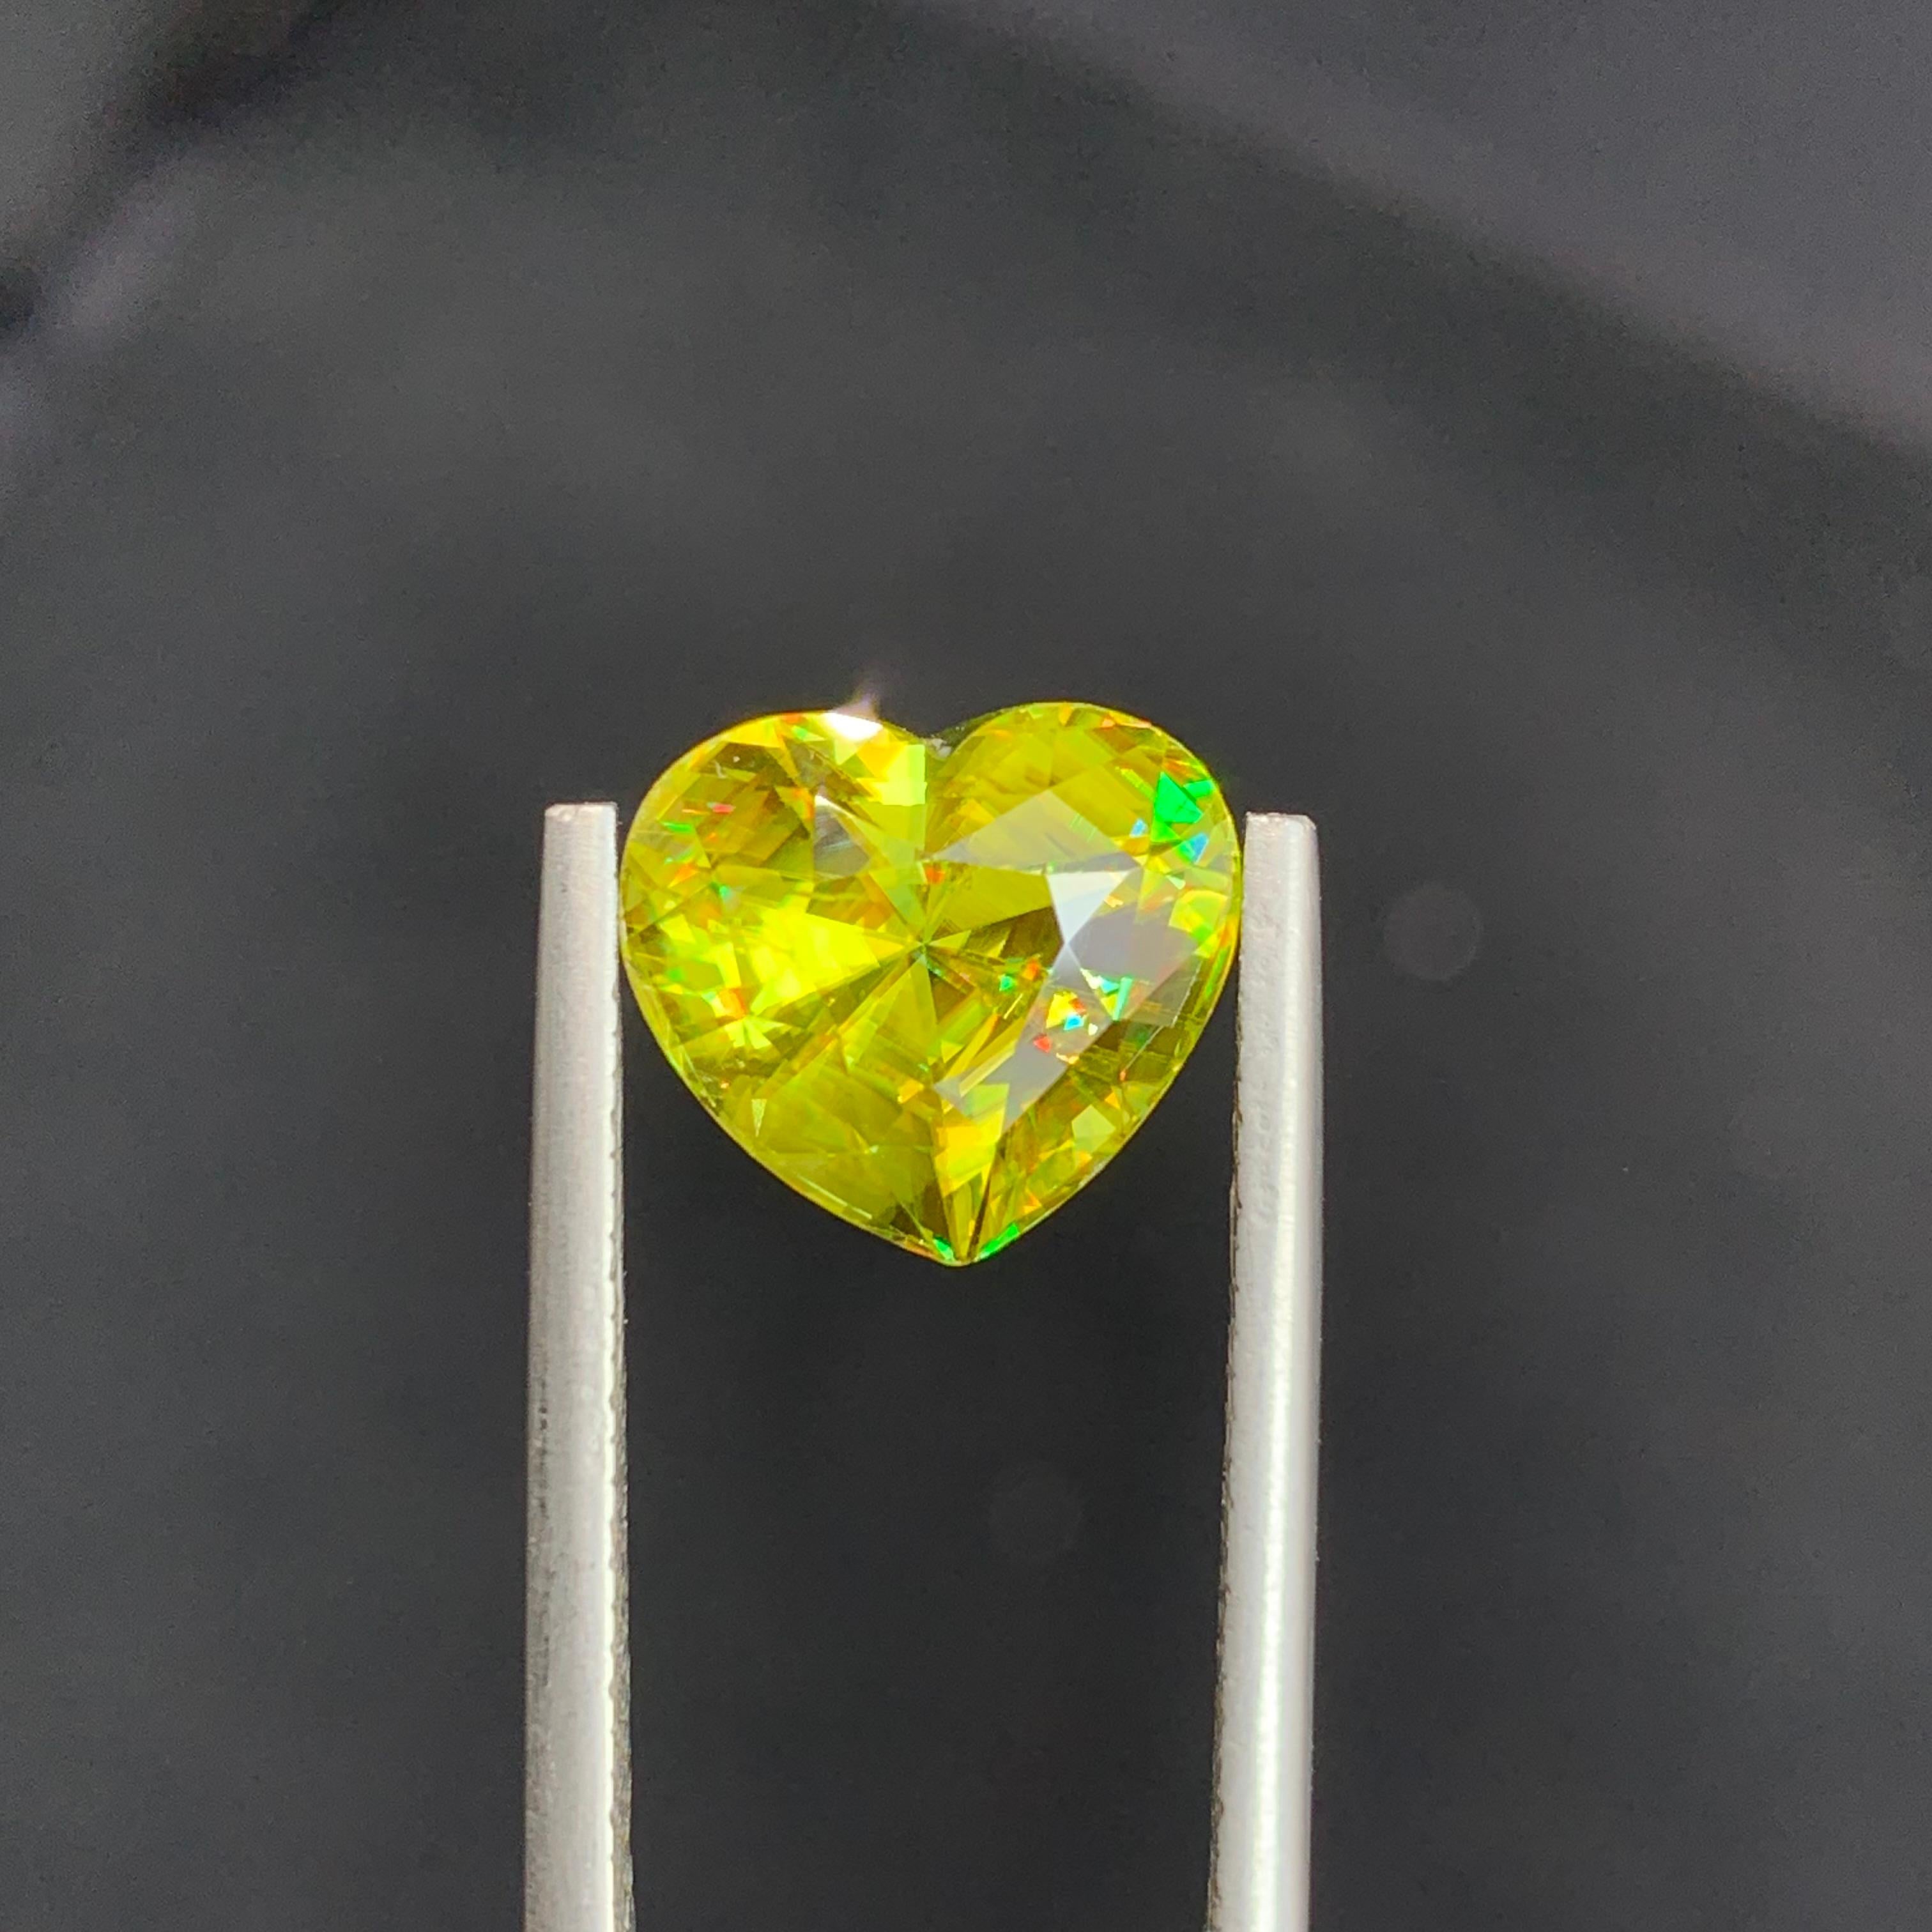 Loose Sphene
Weight: 5.90 Carats
Dimension: 10.2 x 11.4 x 7.5 Mm
Origin: Warsak Pakistan
Shape: Heart 
Color: Yellow Fire
Treatment: Non
Certificate: On Demand

Sphene, also known as titanite, is a remarkable and lesser-known gemstone that has